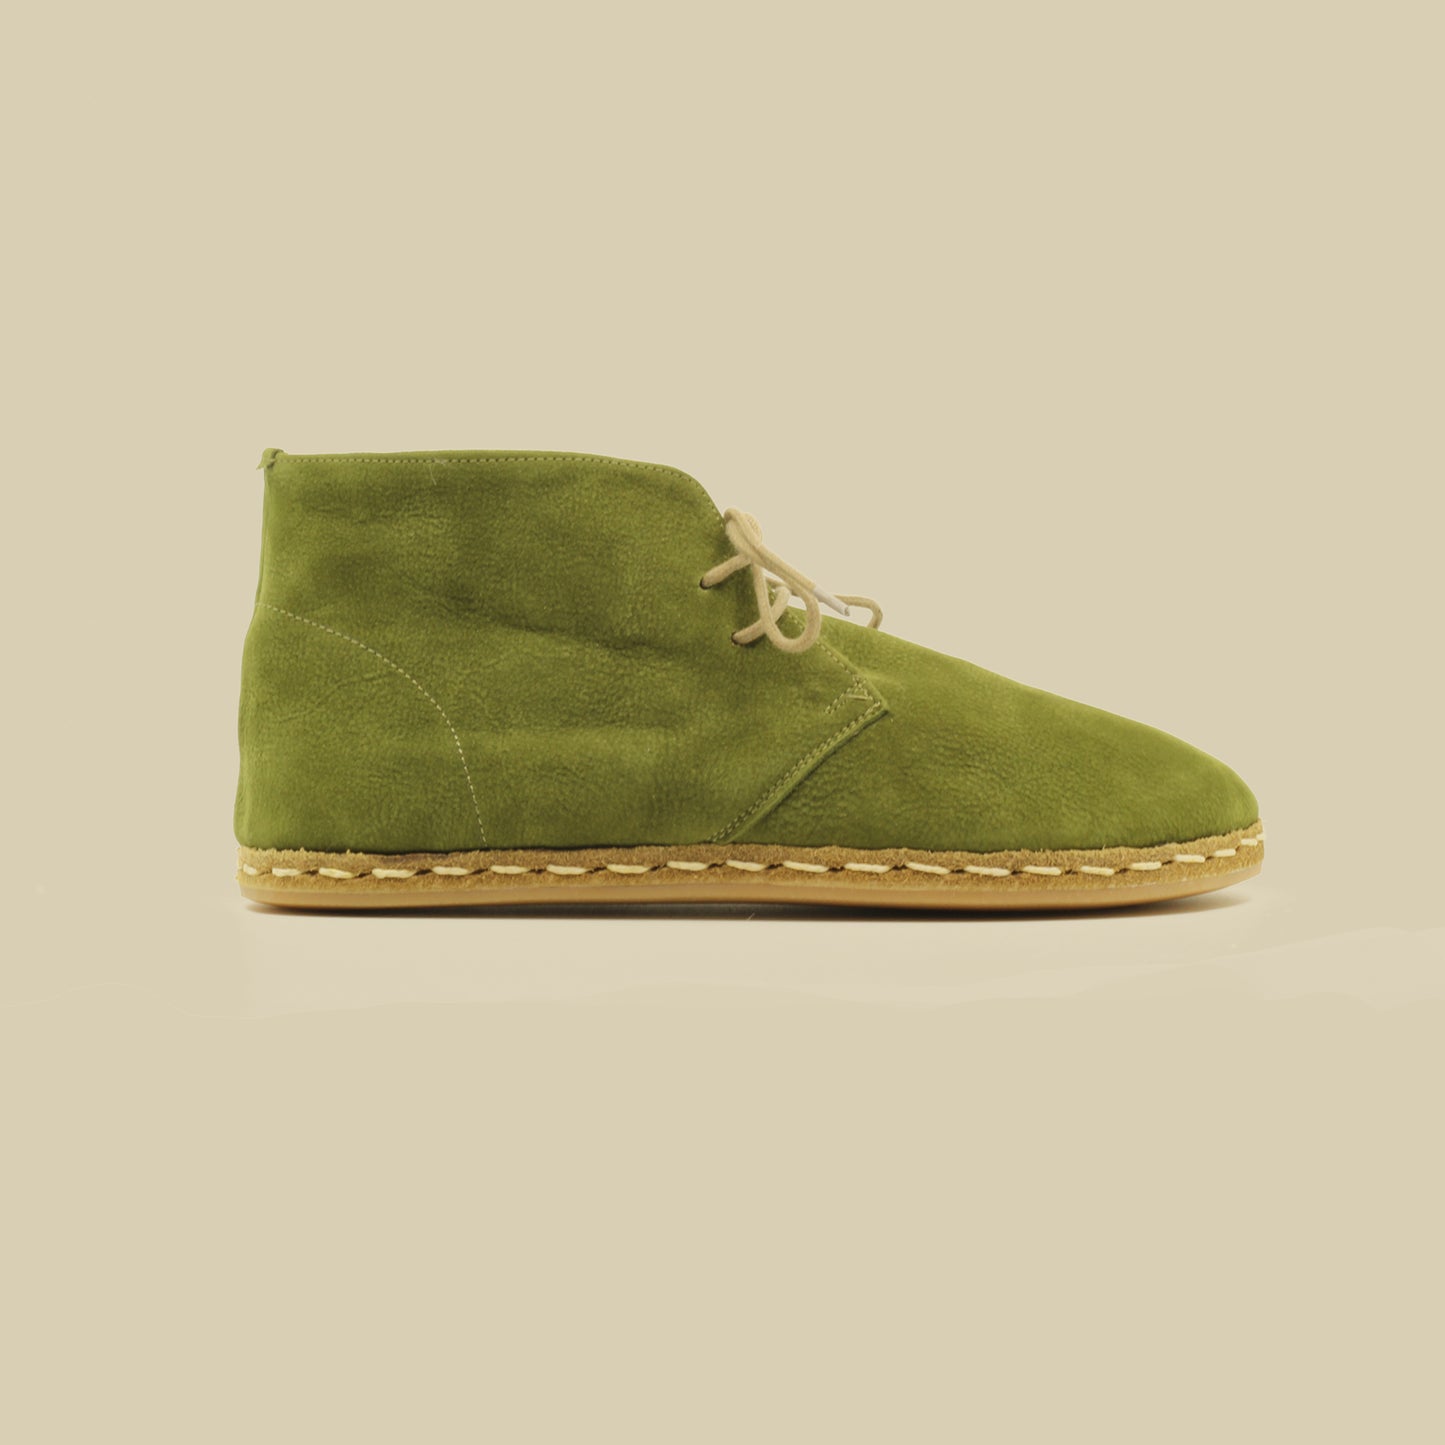 Green Barefoot Leather Men's Boots